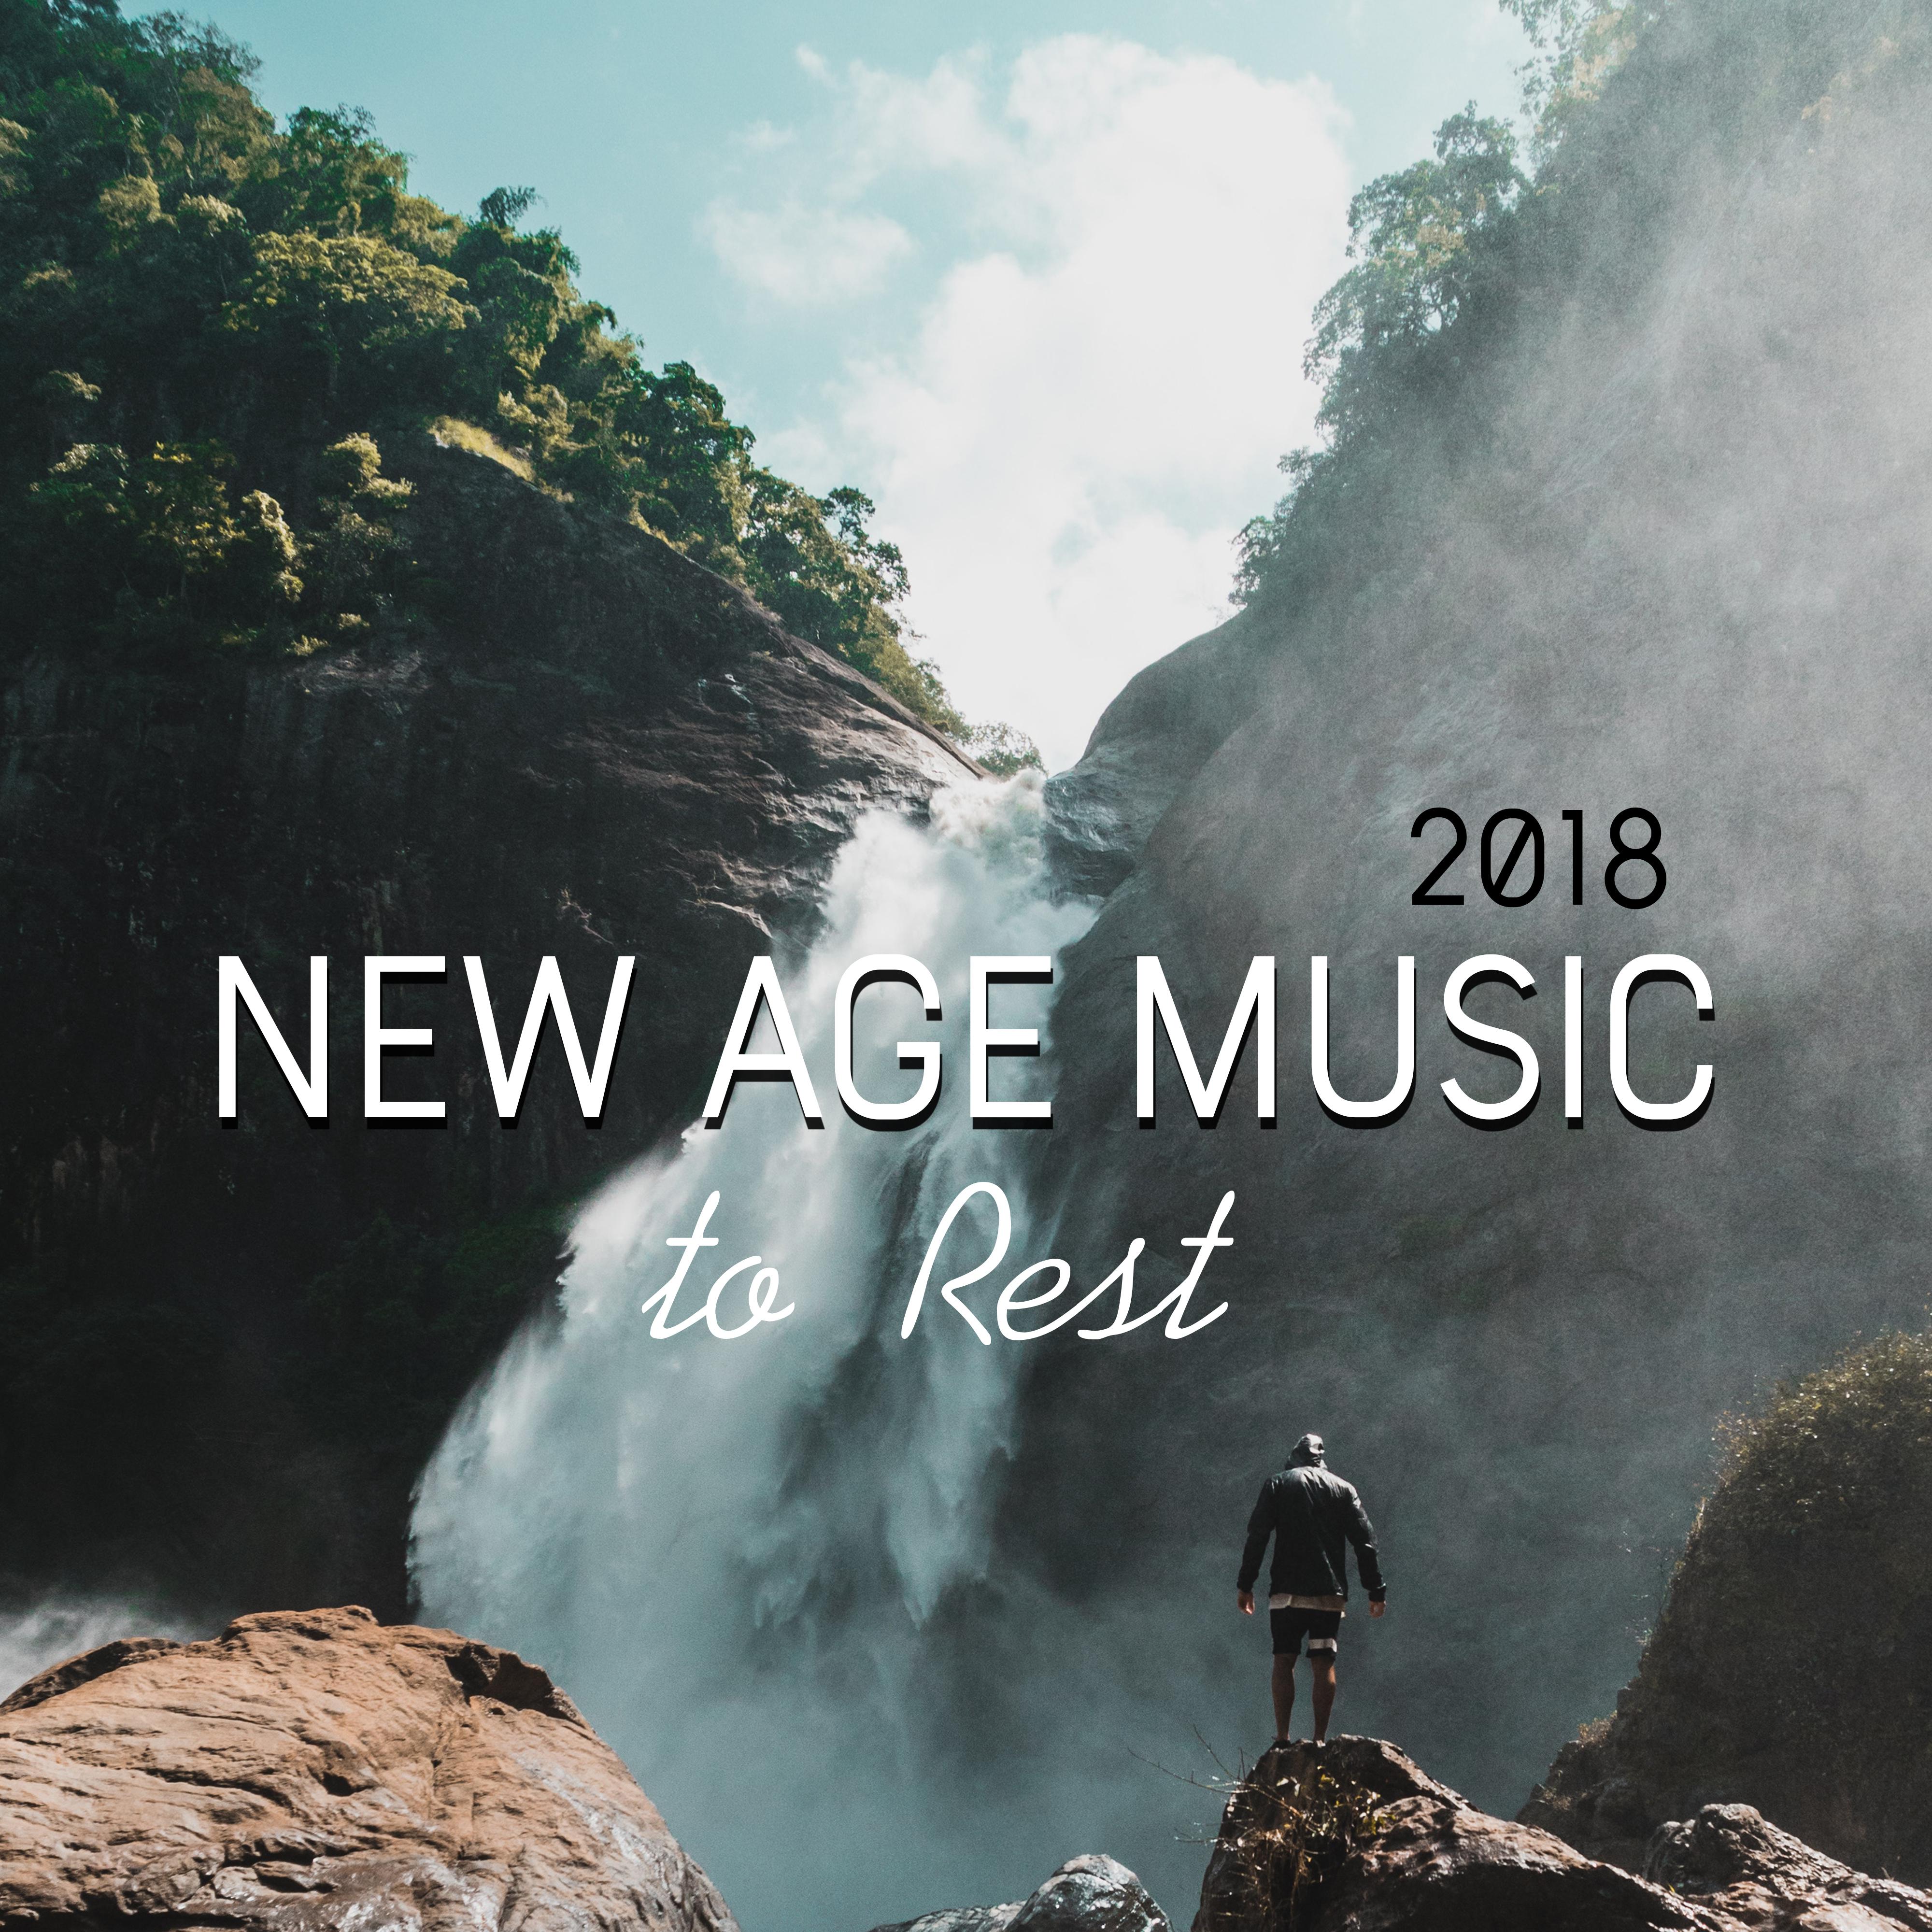 2018 New Age Music to Rest